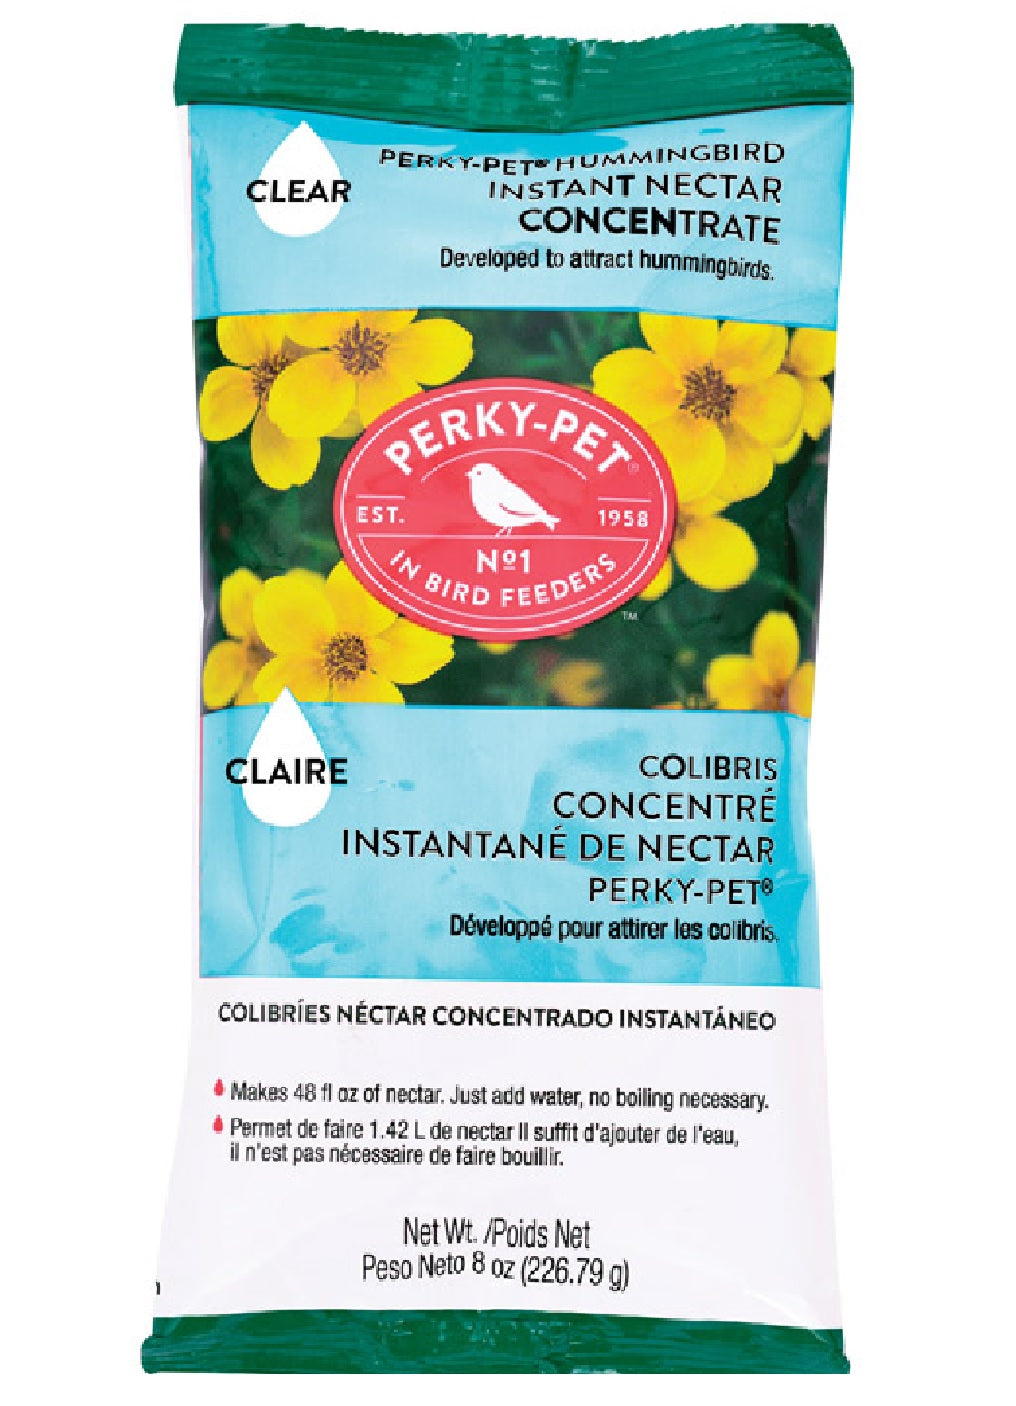 Perky-Pet 243SF Hummingbird Instant Nectar Concentrate, 8 Oz